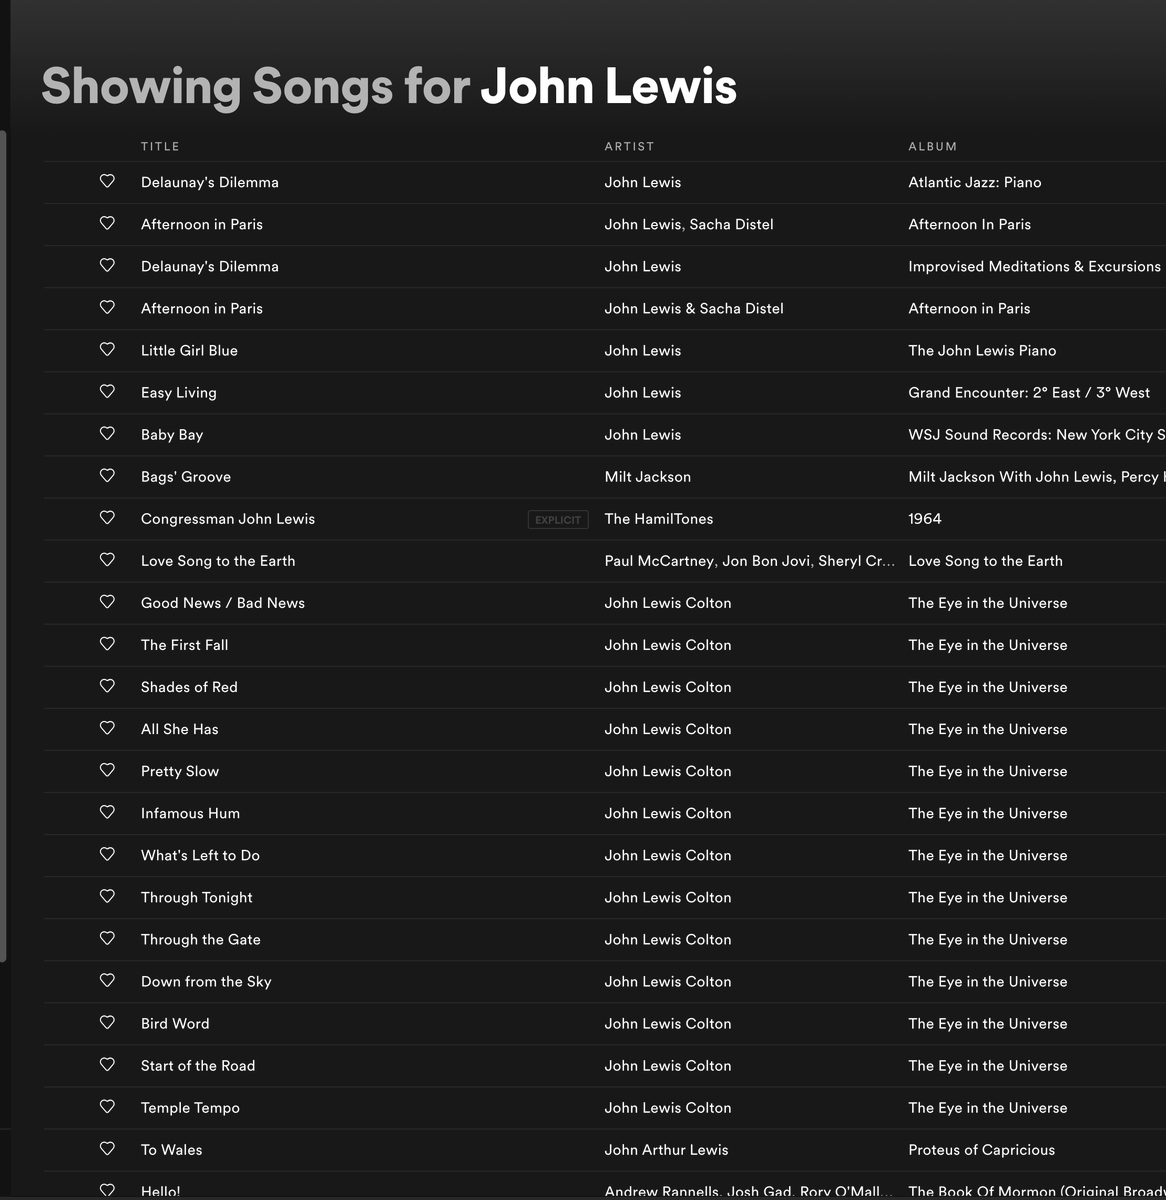 And don't even try to do a Spotify search on specific musicians whose name isn't part of the band's name. John Lewis might have been music director for the Modern Jazz Quartet for most of his life, but the folks at Spotify are blissfully unaware of this connection.